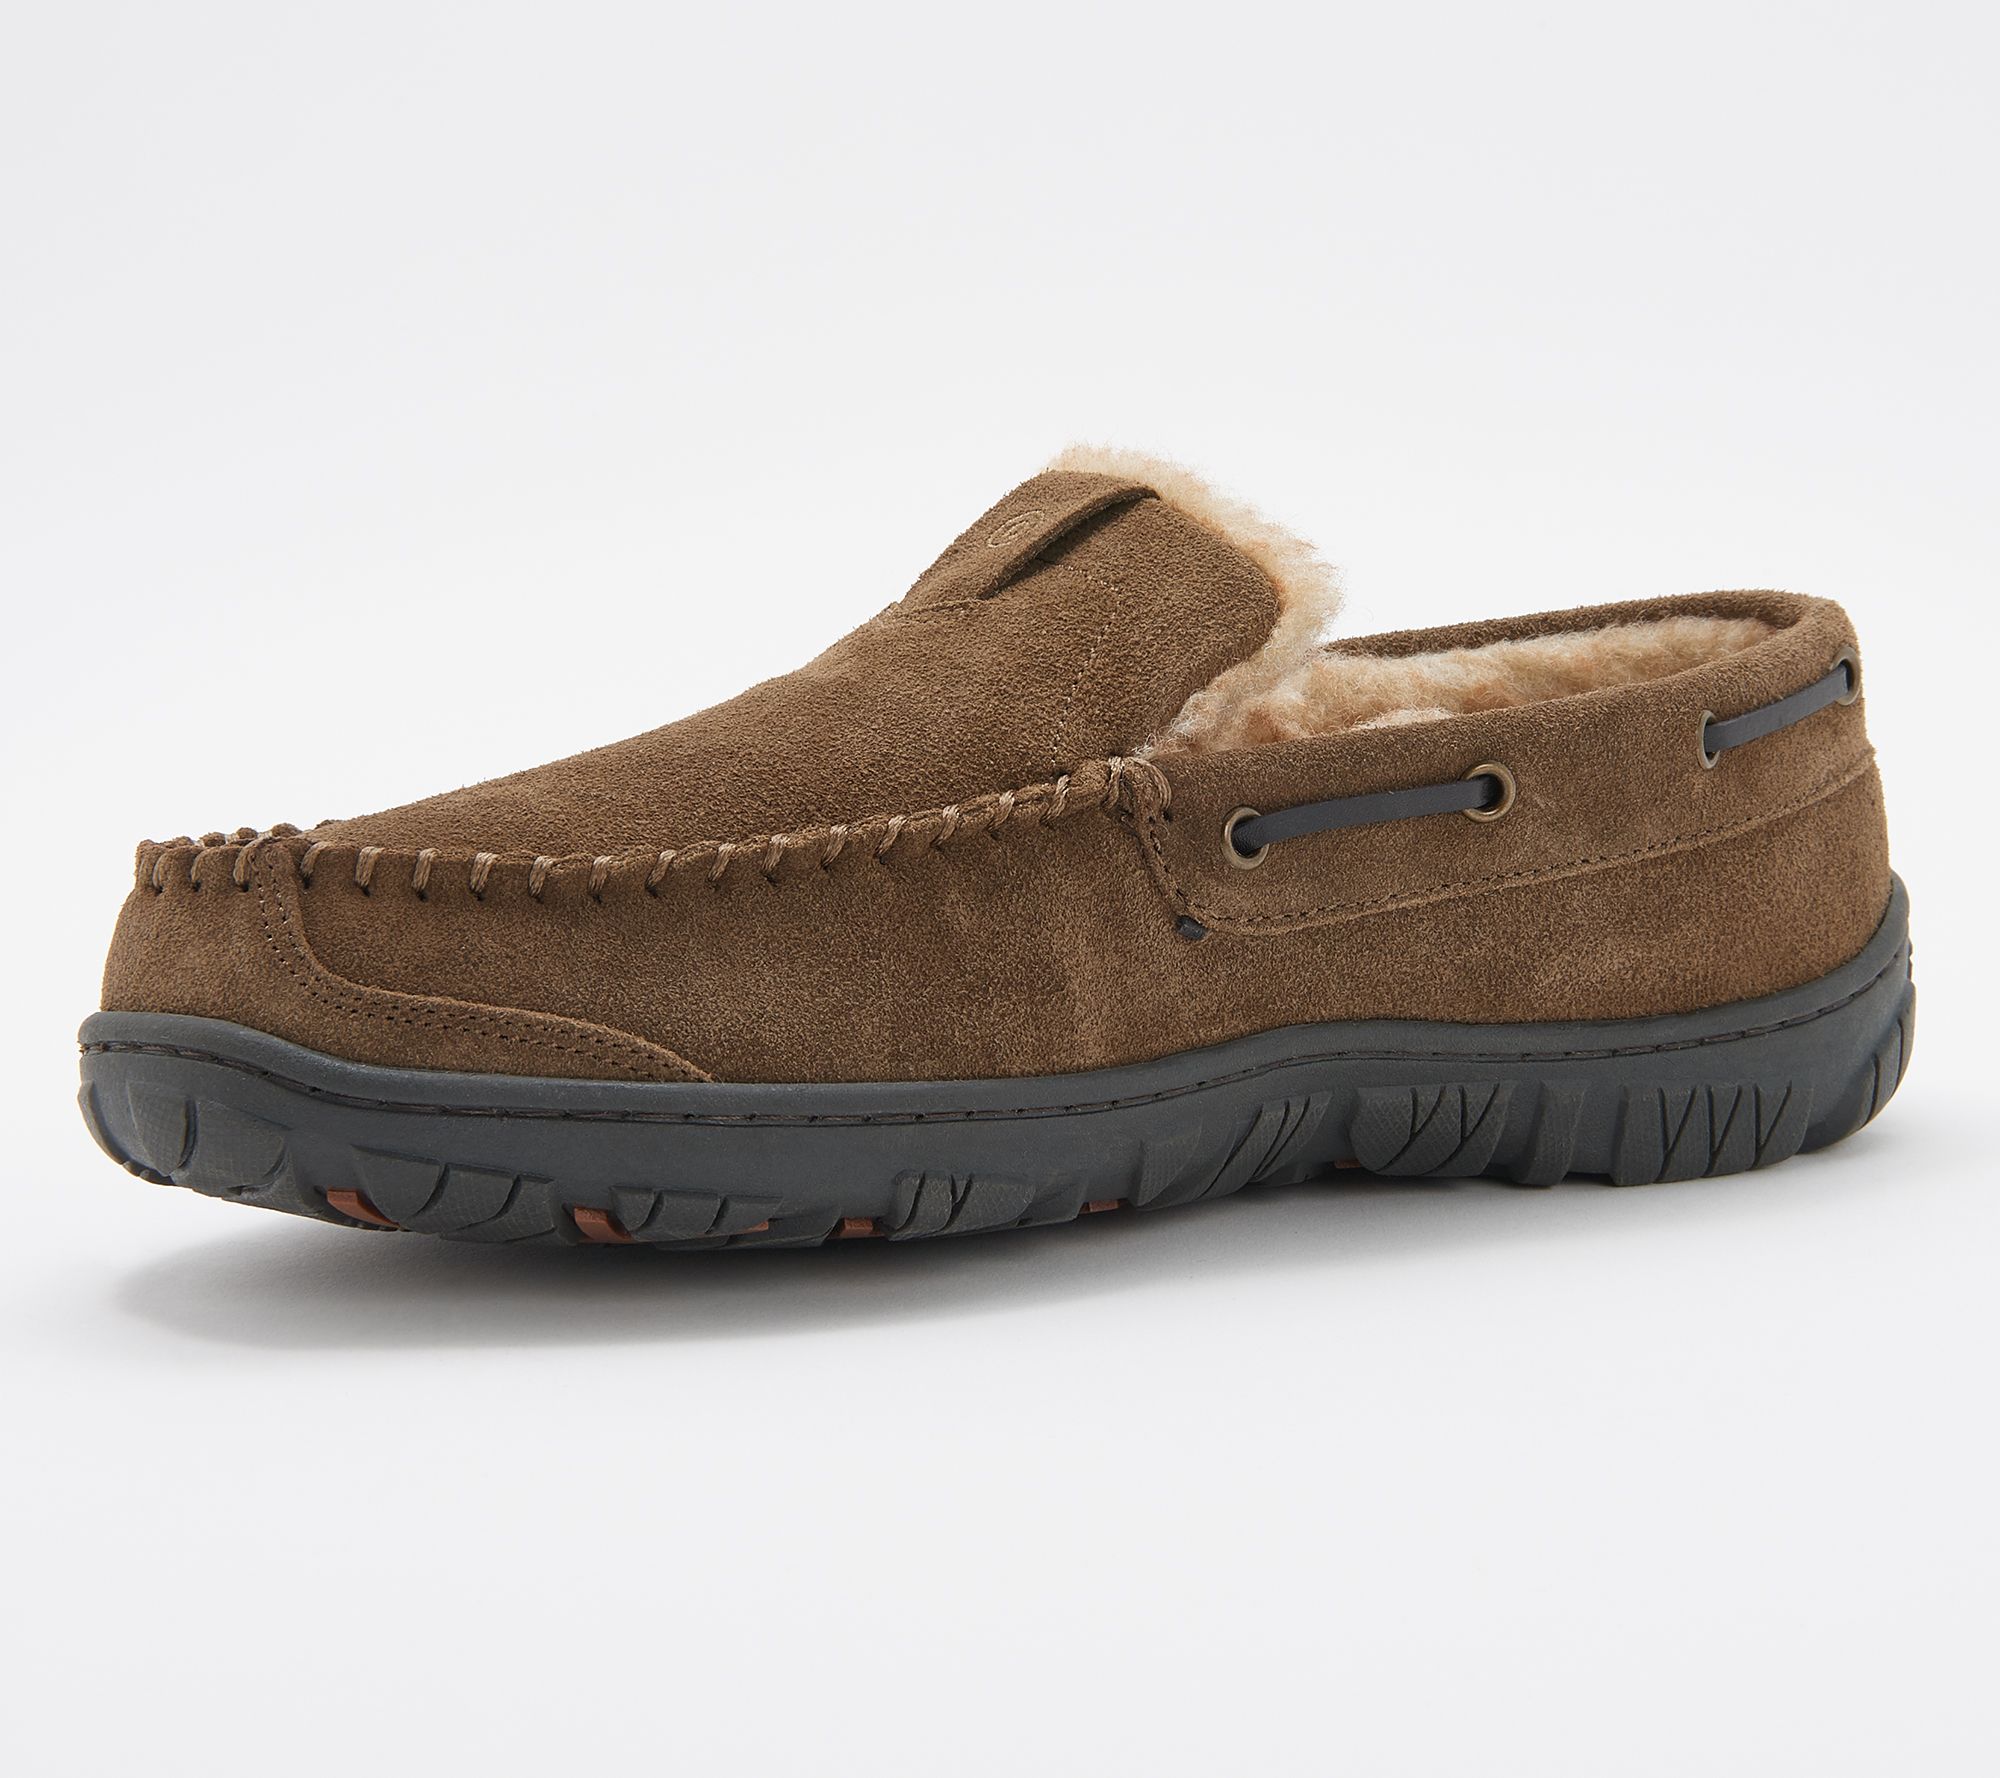 Buy,clarks twin gore moccasins - suede for men,Exclusive Deals and ...